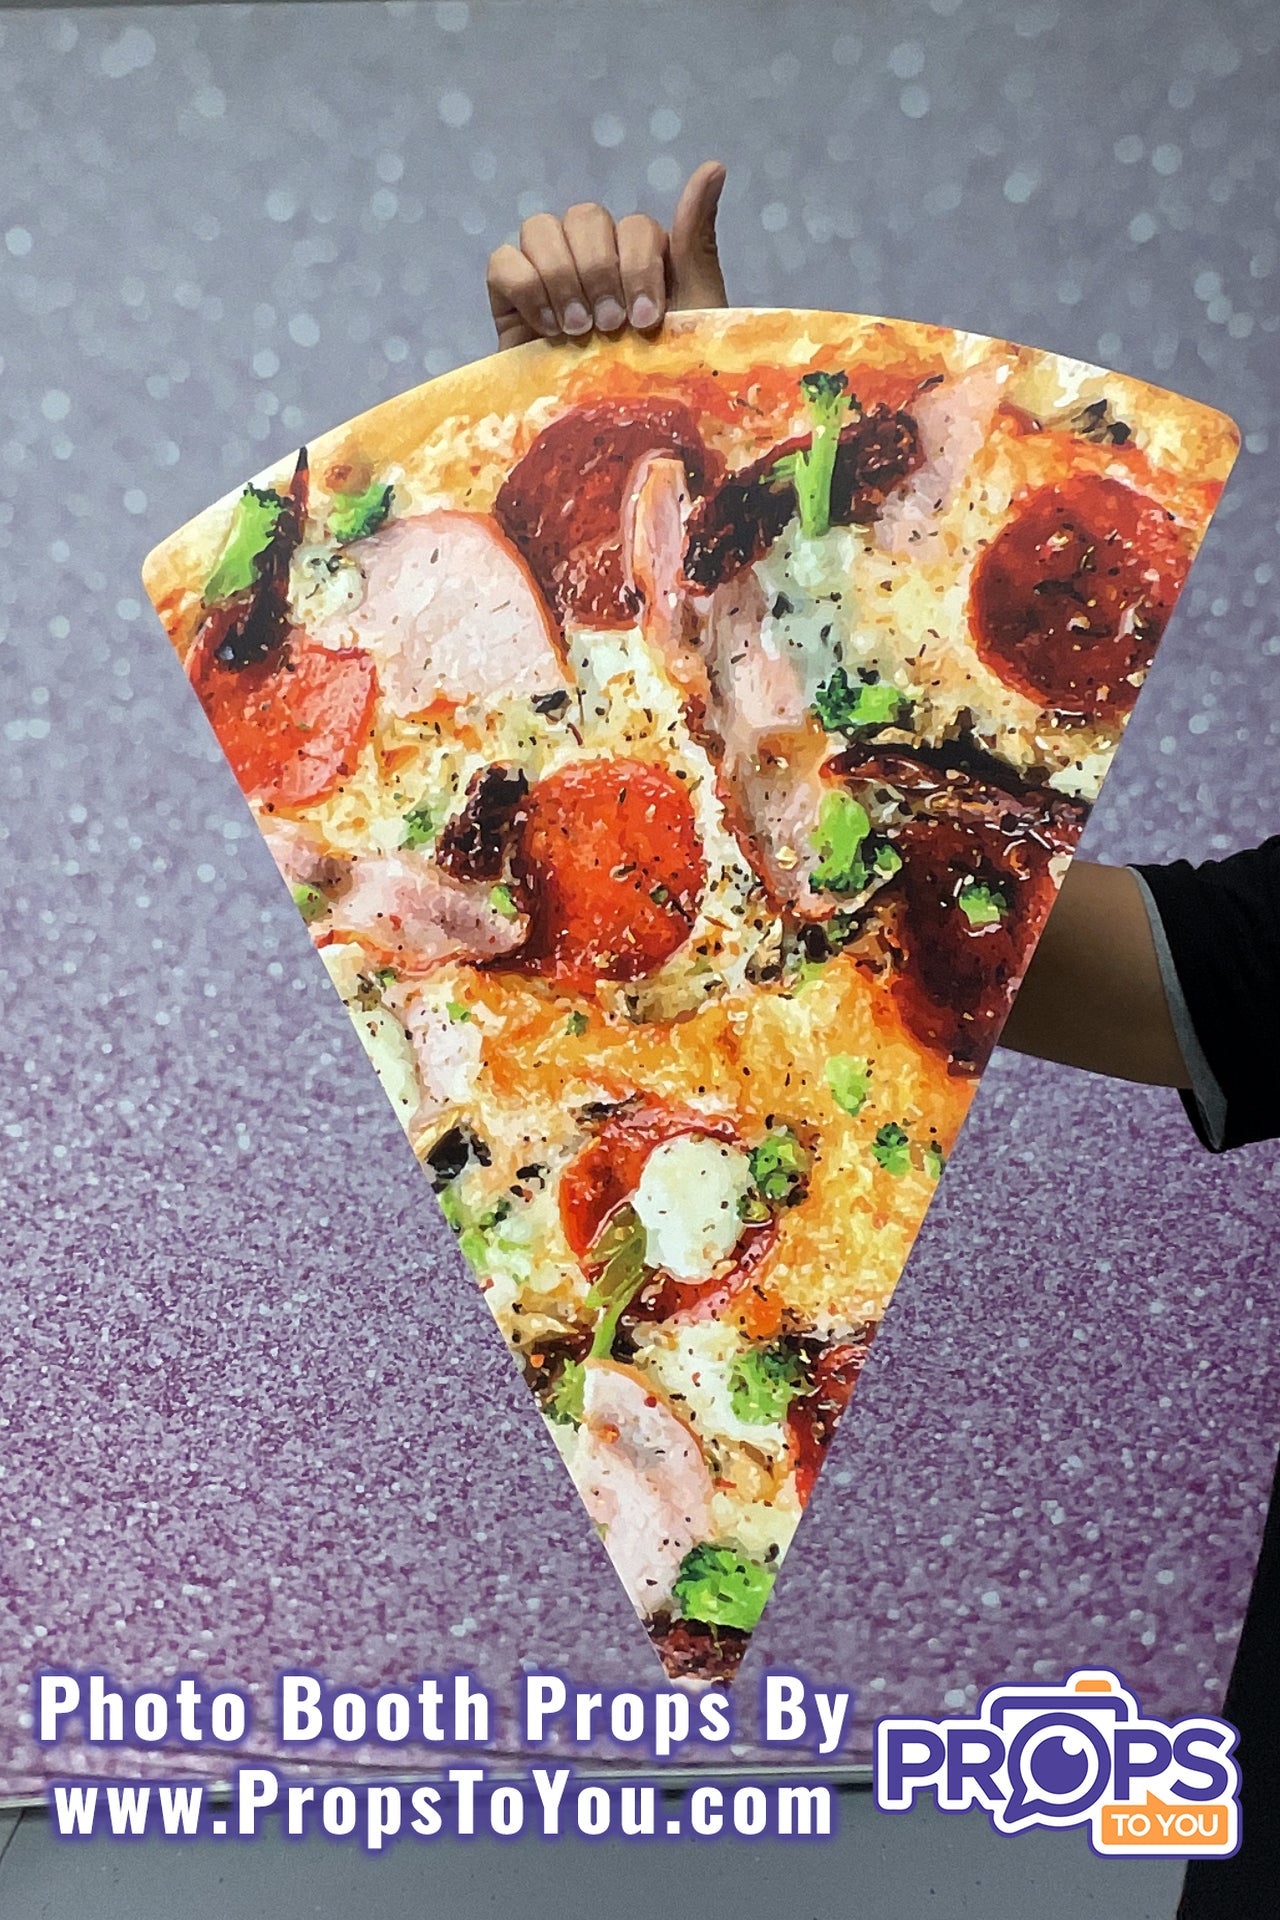 BIG Props: Pepperoni/Vegetarian Pizza Slice Photo Booth Prop